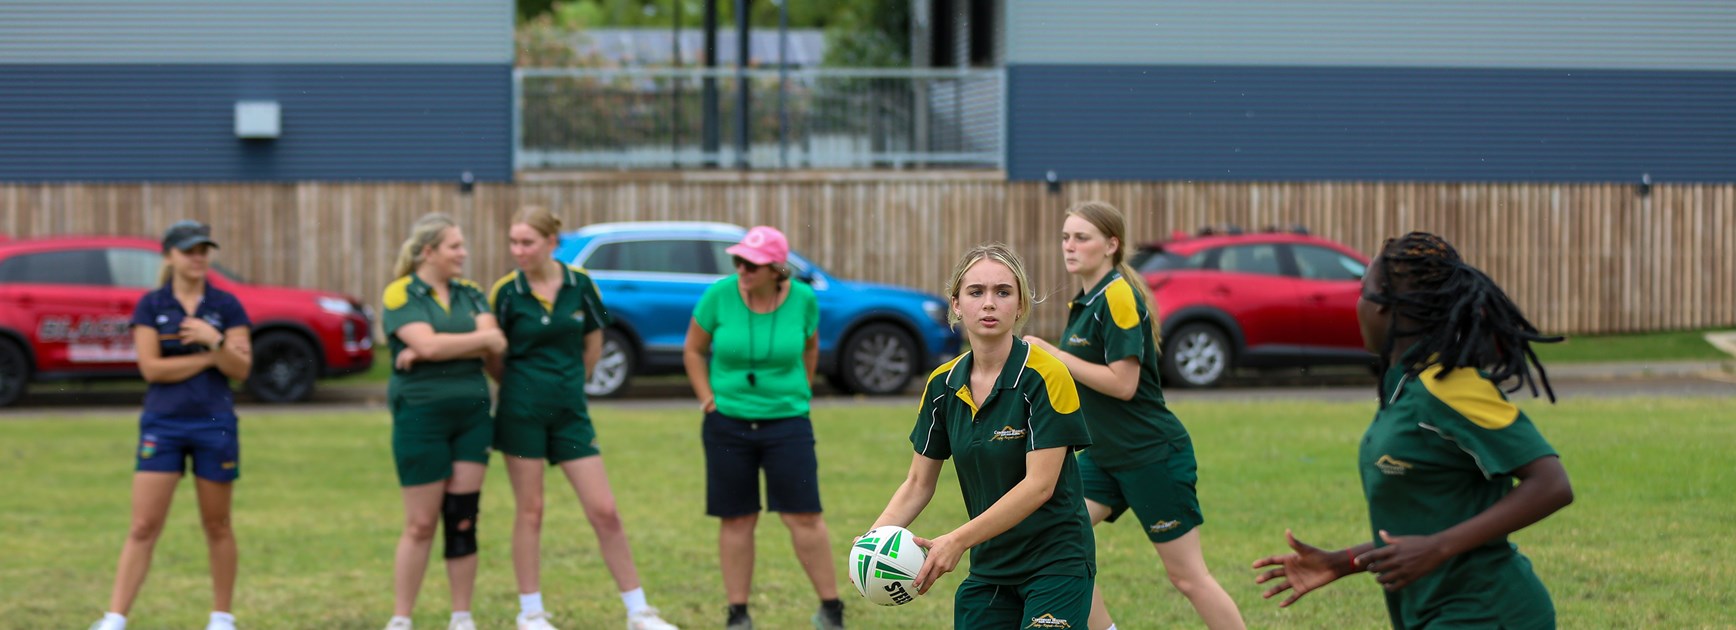 Community corner: Schools link to improve player outcomes